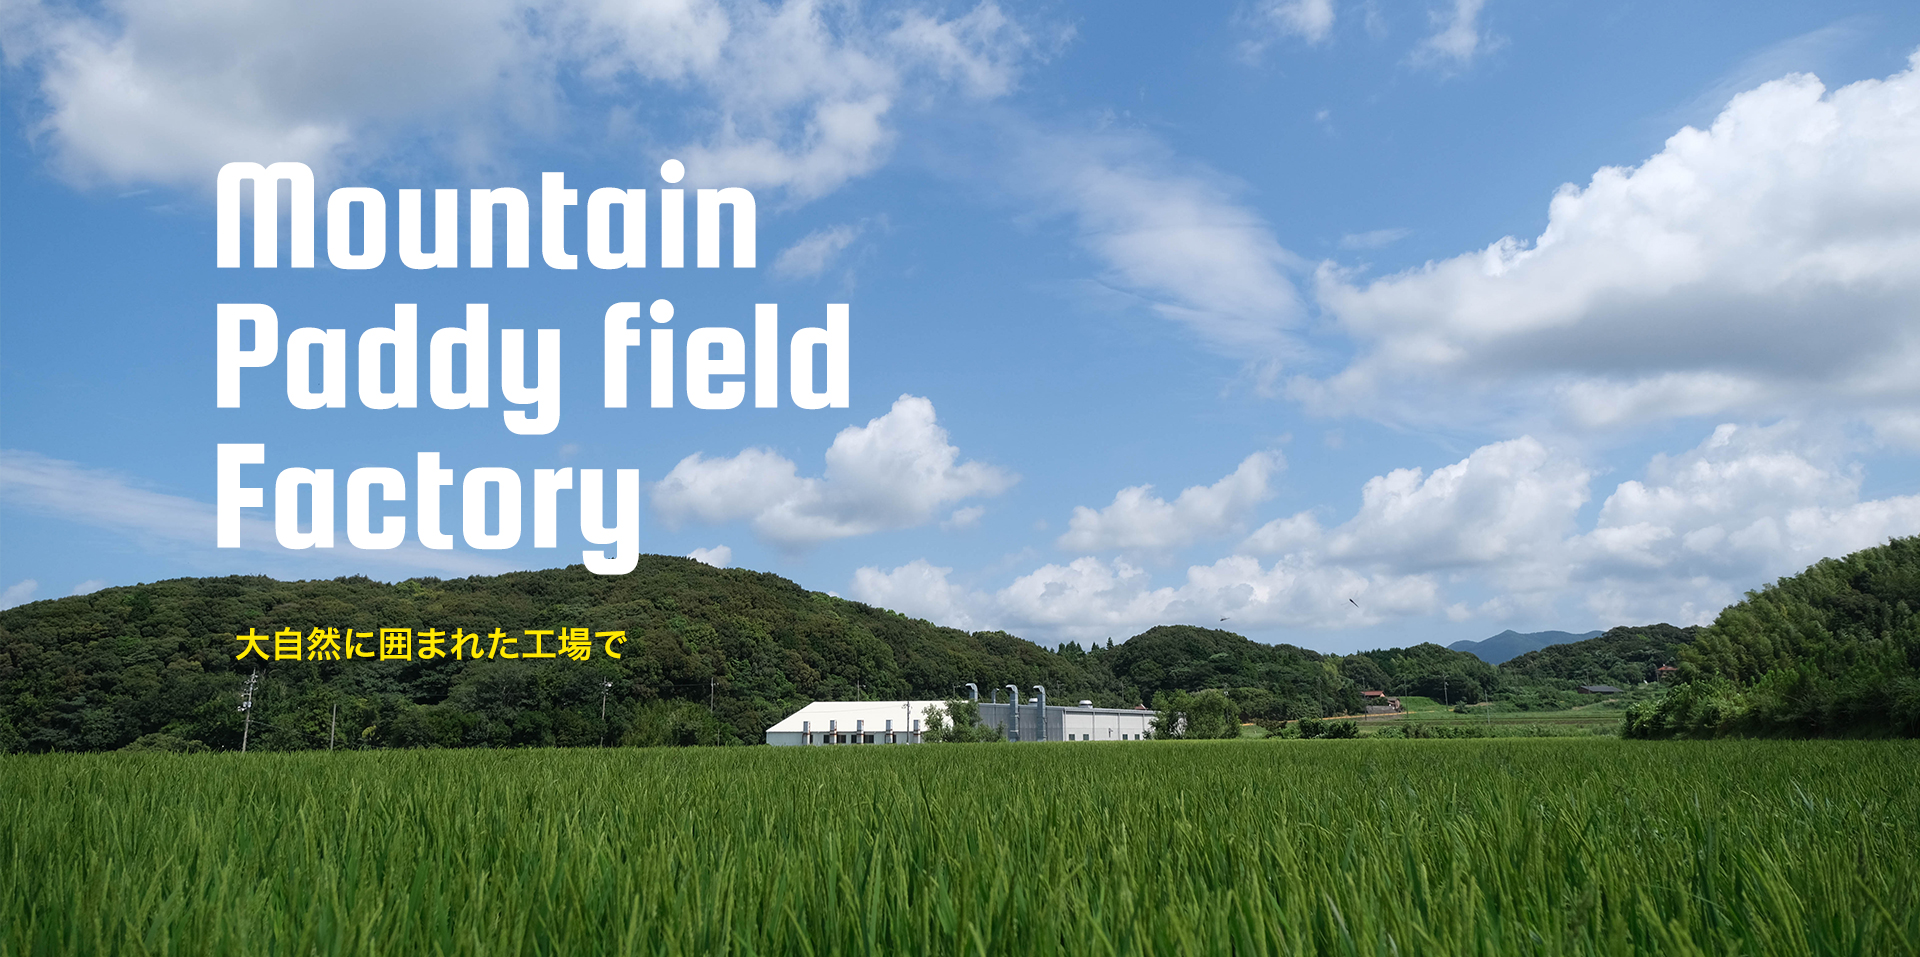 Mountain Paddy field Factory　大自然に囲まれた工場で